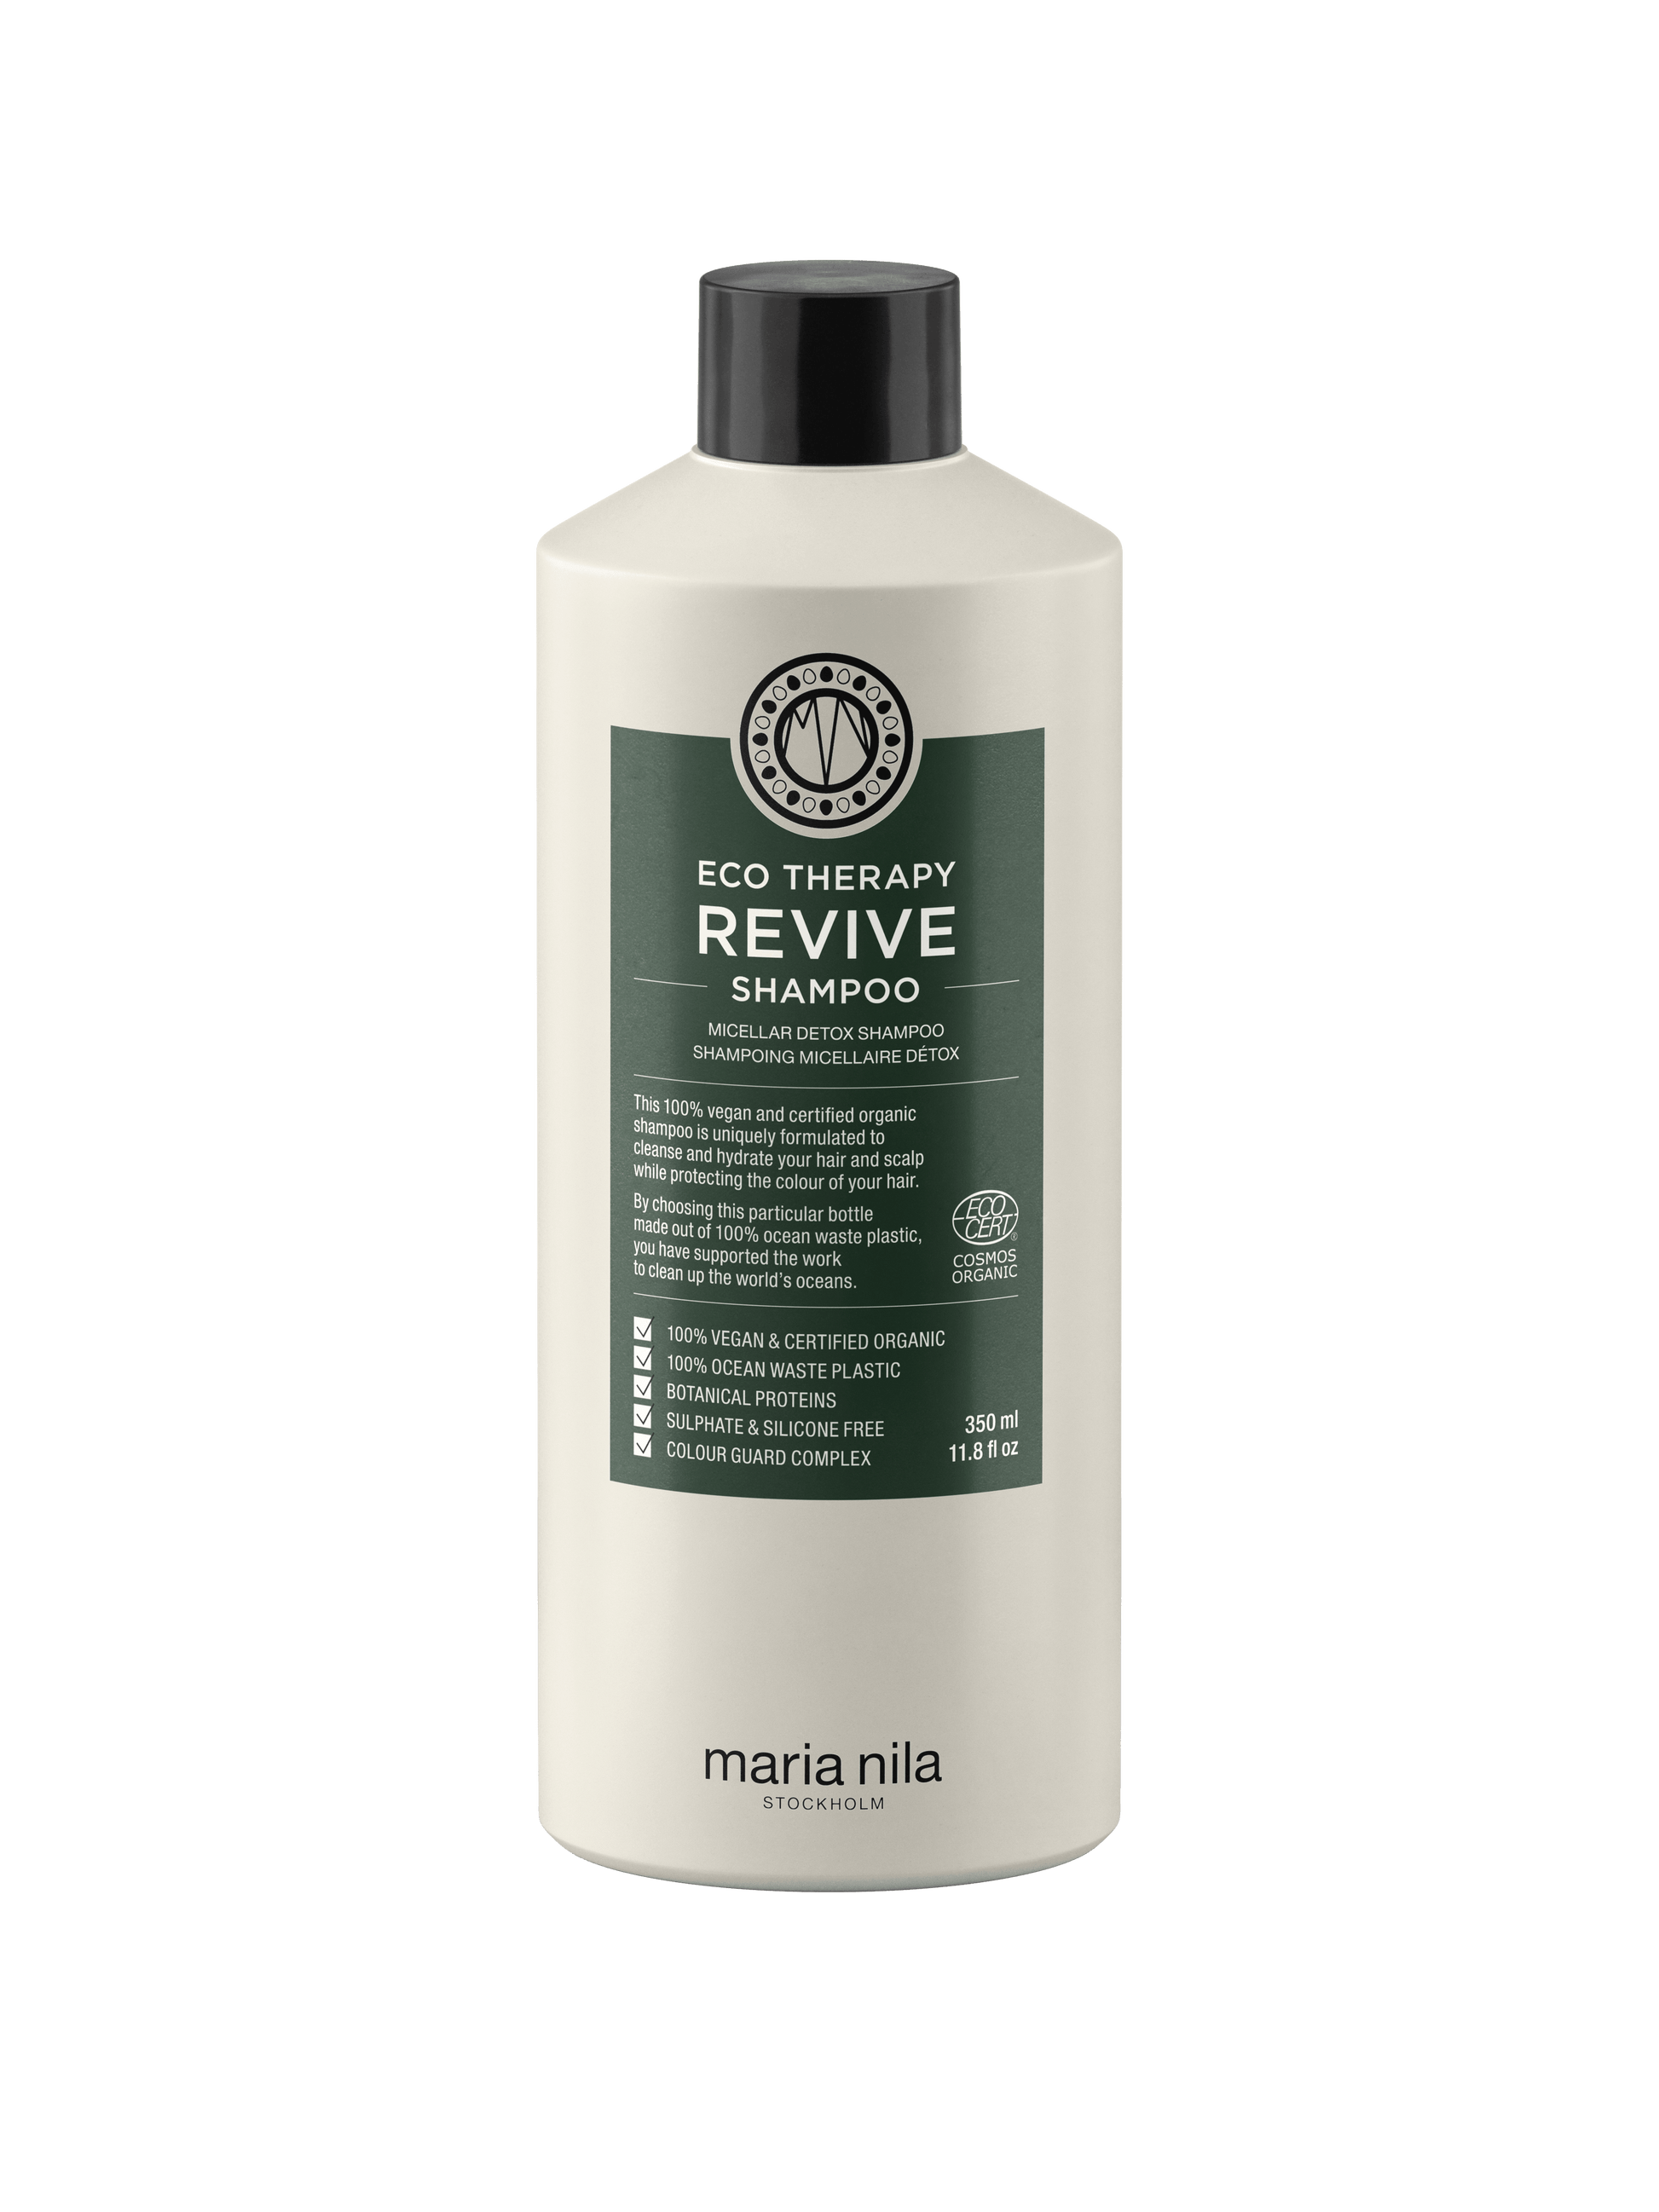 Eco Therapy Revive Shampoo - The Coloroom 